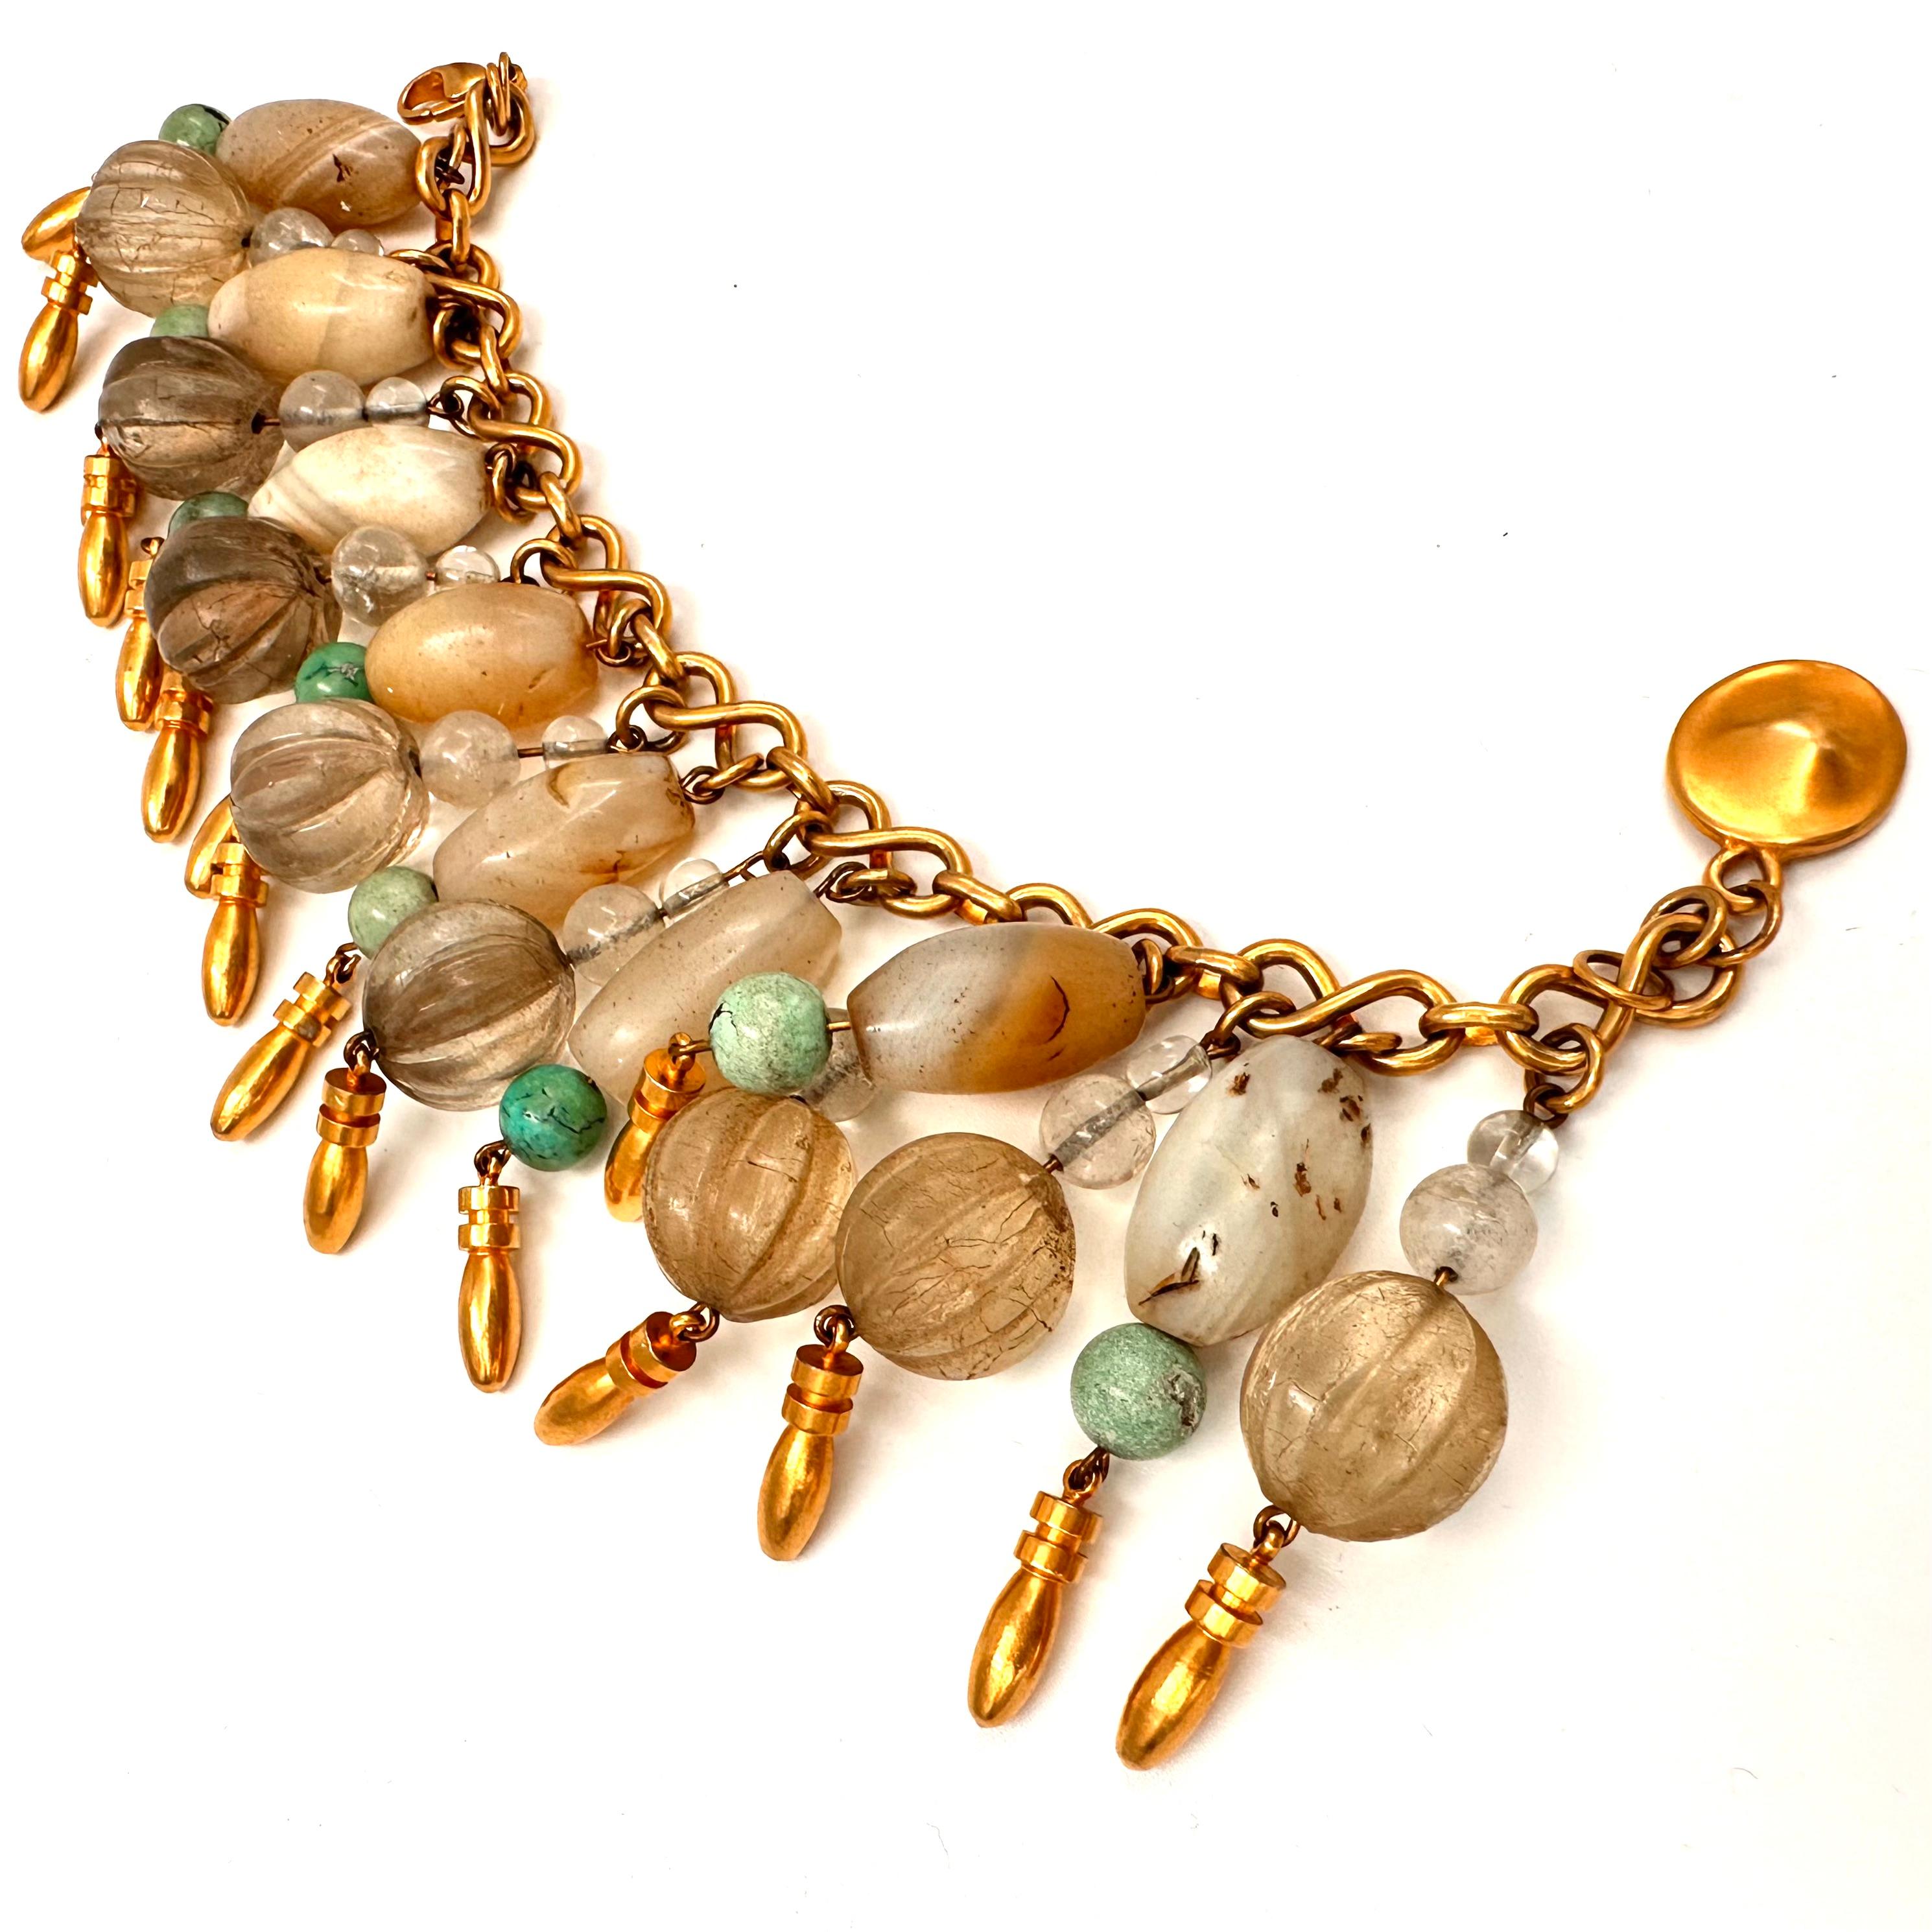 Robert Lee Morris Wabi Sabi Stone Charm Bracelet made in 1984 is a One of a Kind. It is a blend of vintage African trading beads, made of agate and quartz stone, with molded glass beads, turquoise and crystal all hanging on a brass eternity chain